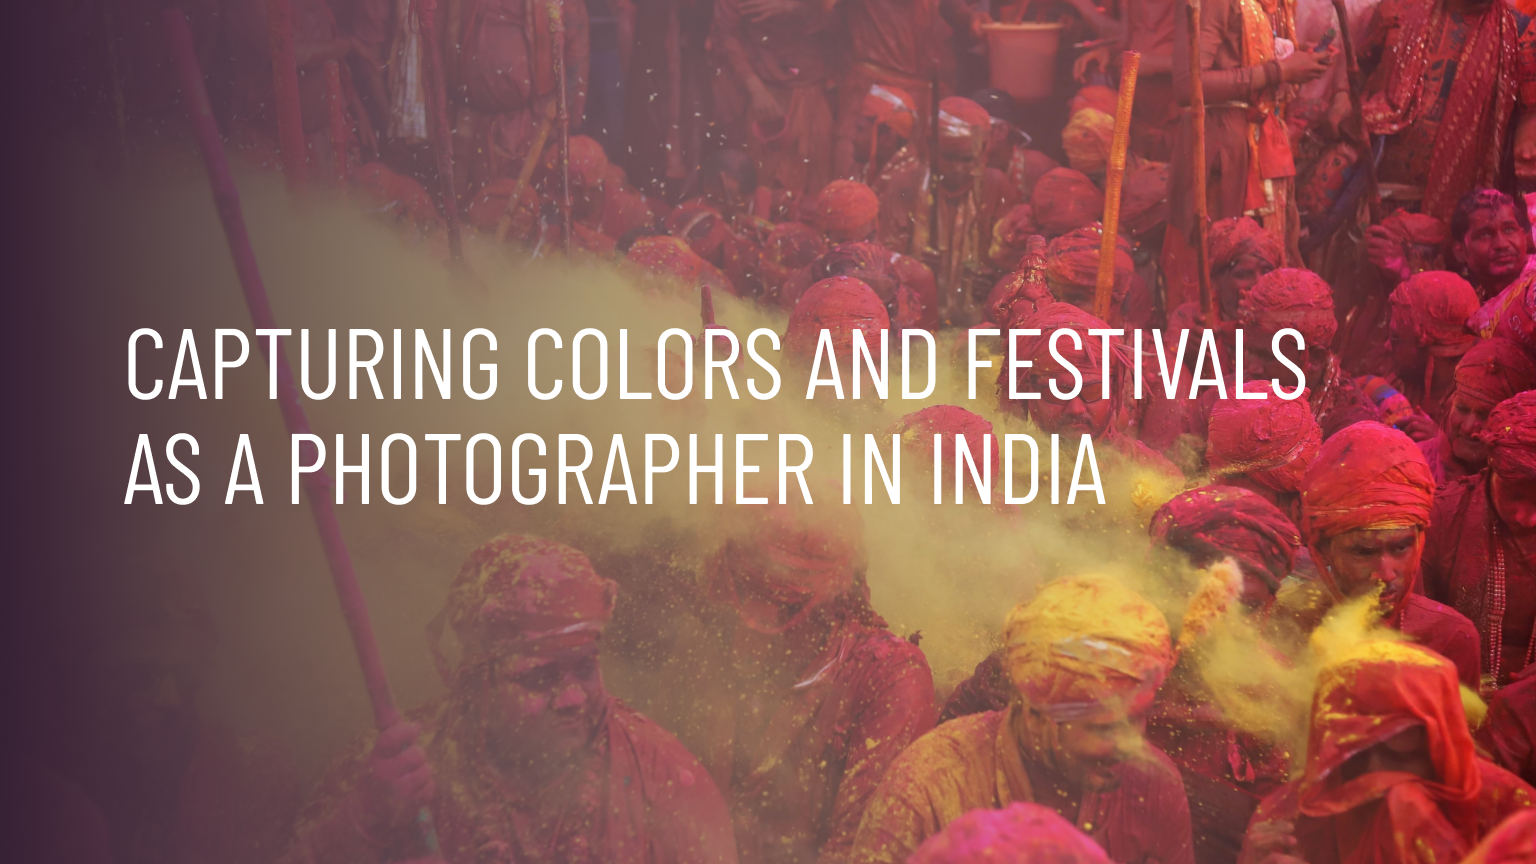 Capturing Colors And Festivals As A Photographer In India | IndieVisual